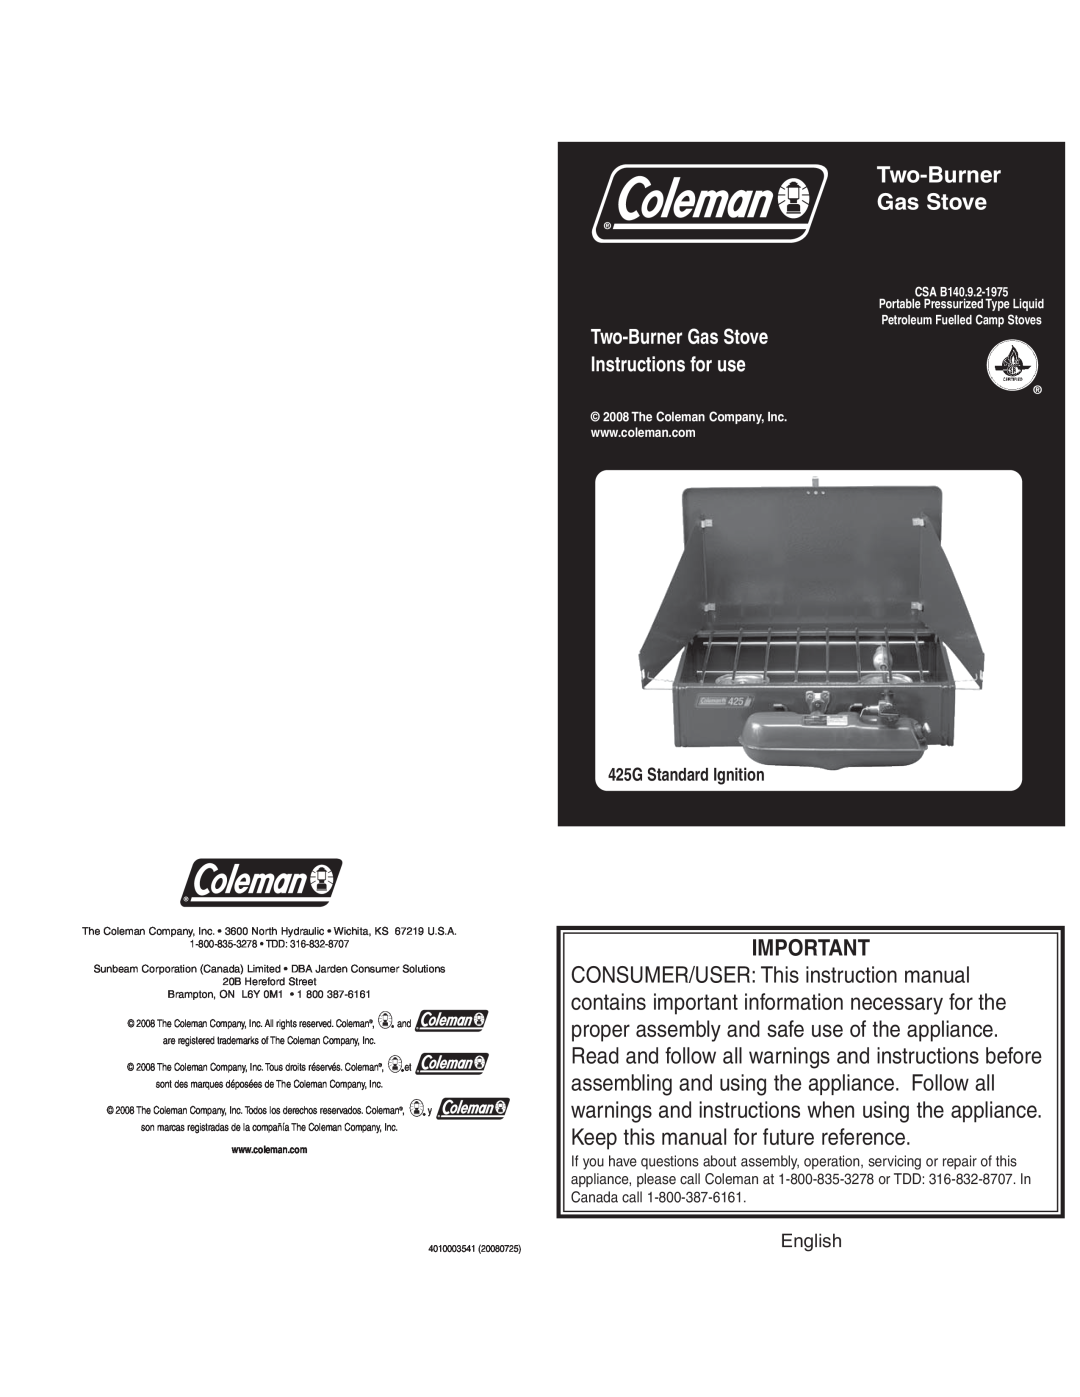 Coleman instruction manual Two-Burner Gas Stove Instructions for use, English, 425G Standard Ignition 